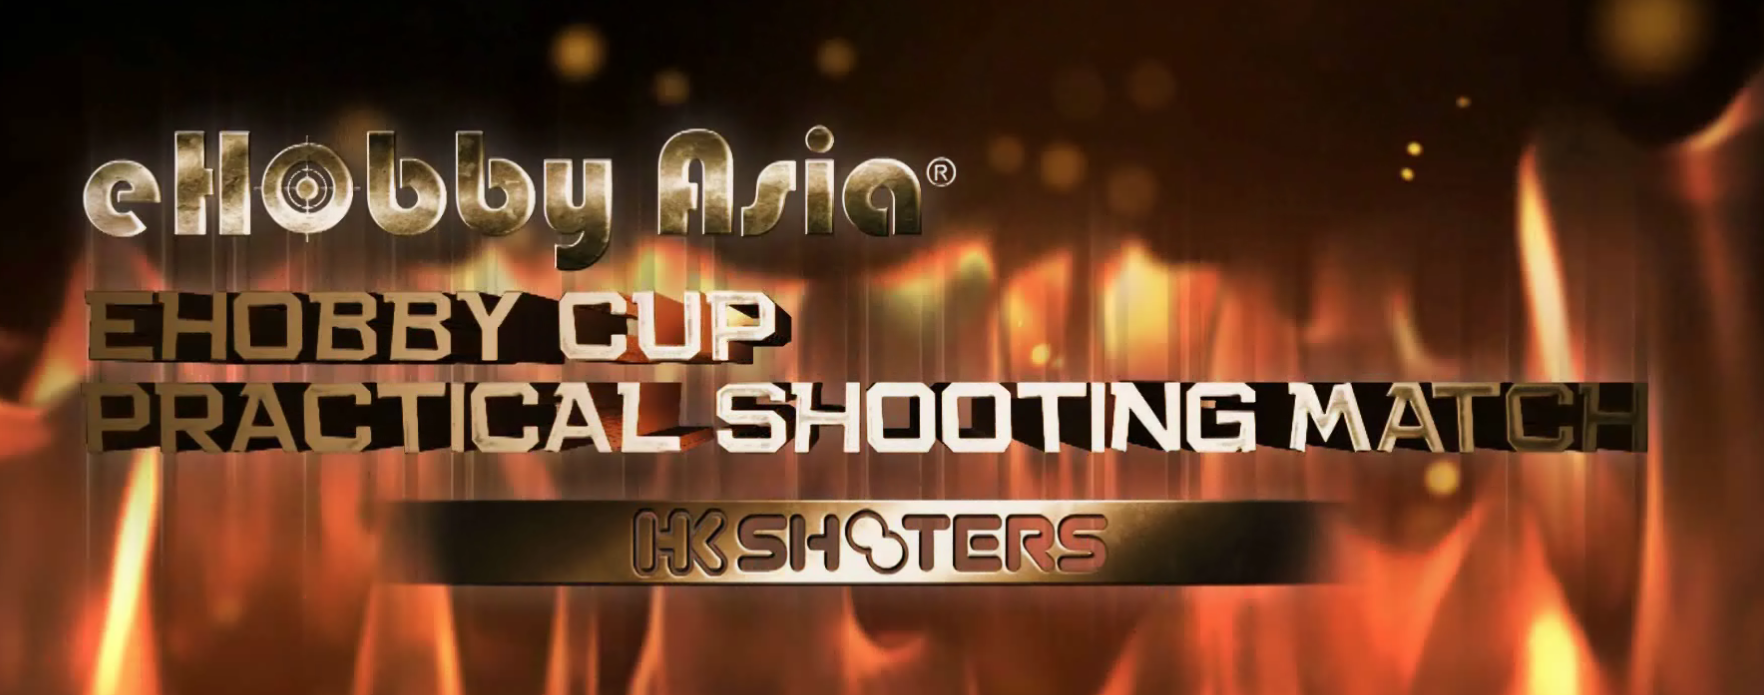 eHobby CUP – Practical Shooting Match